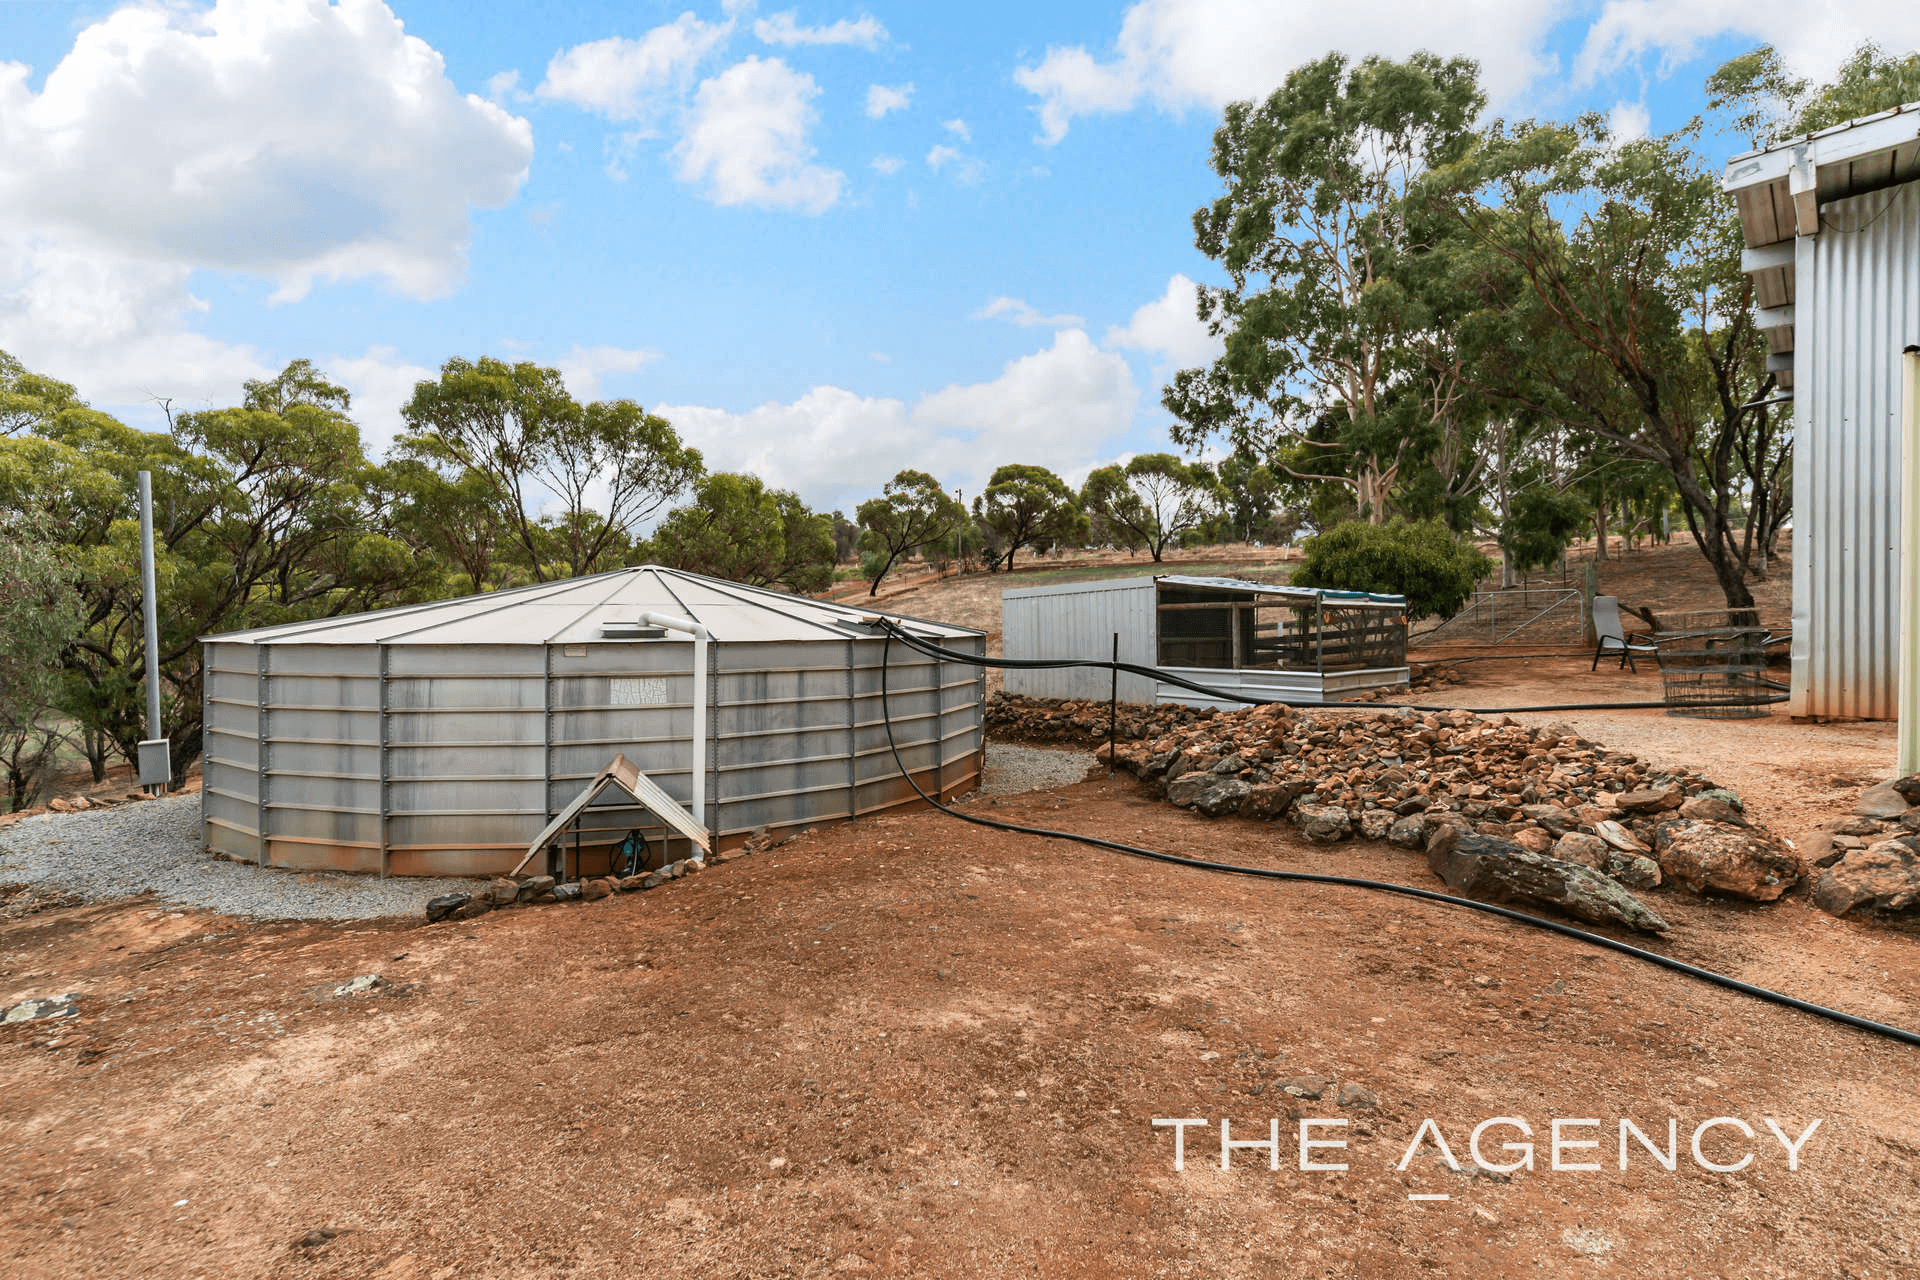 301 Coondle Drive, Coondle, WA 6566